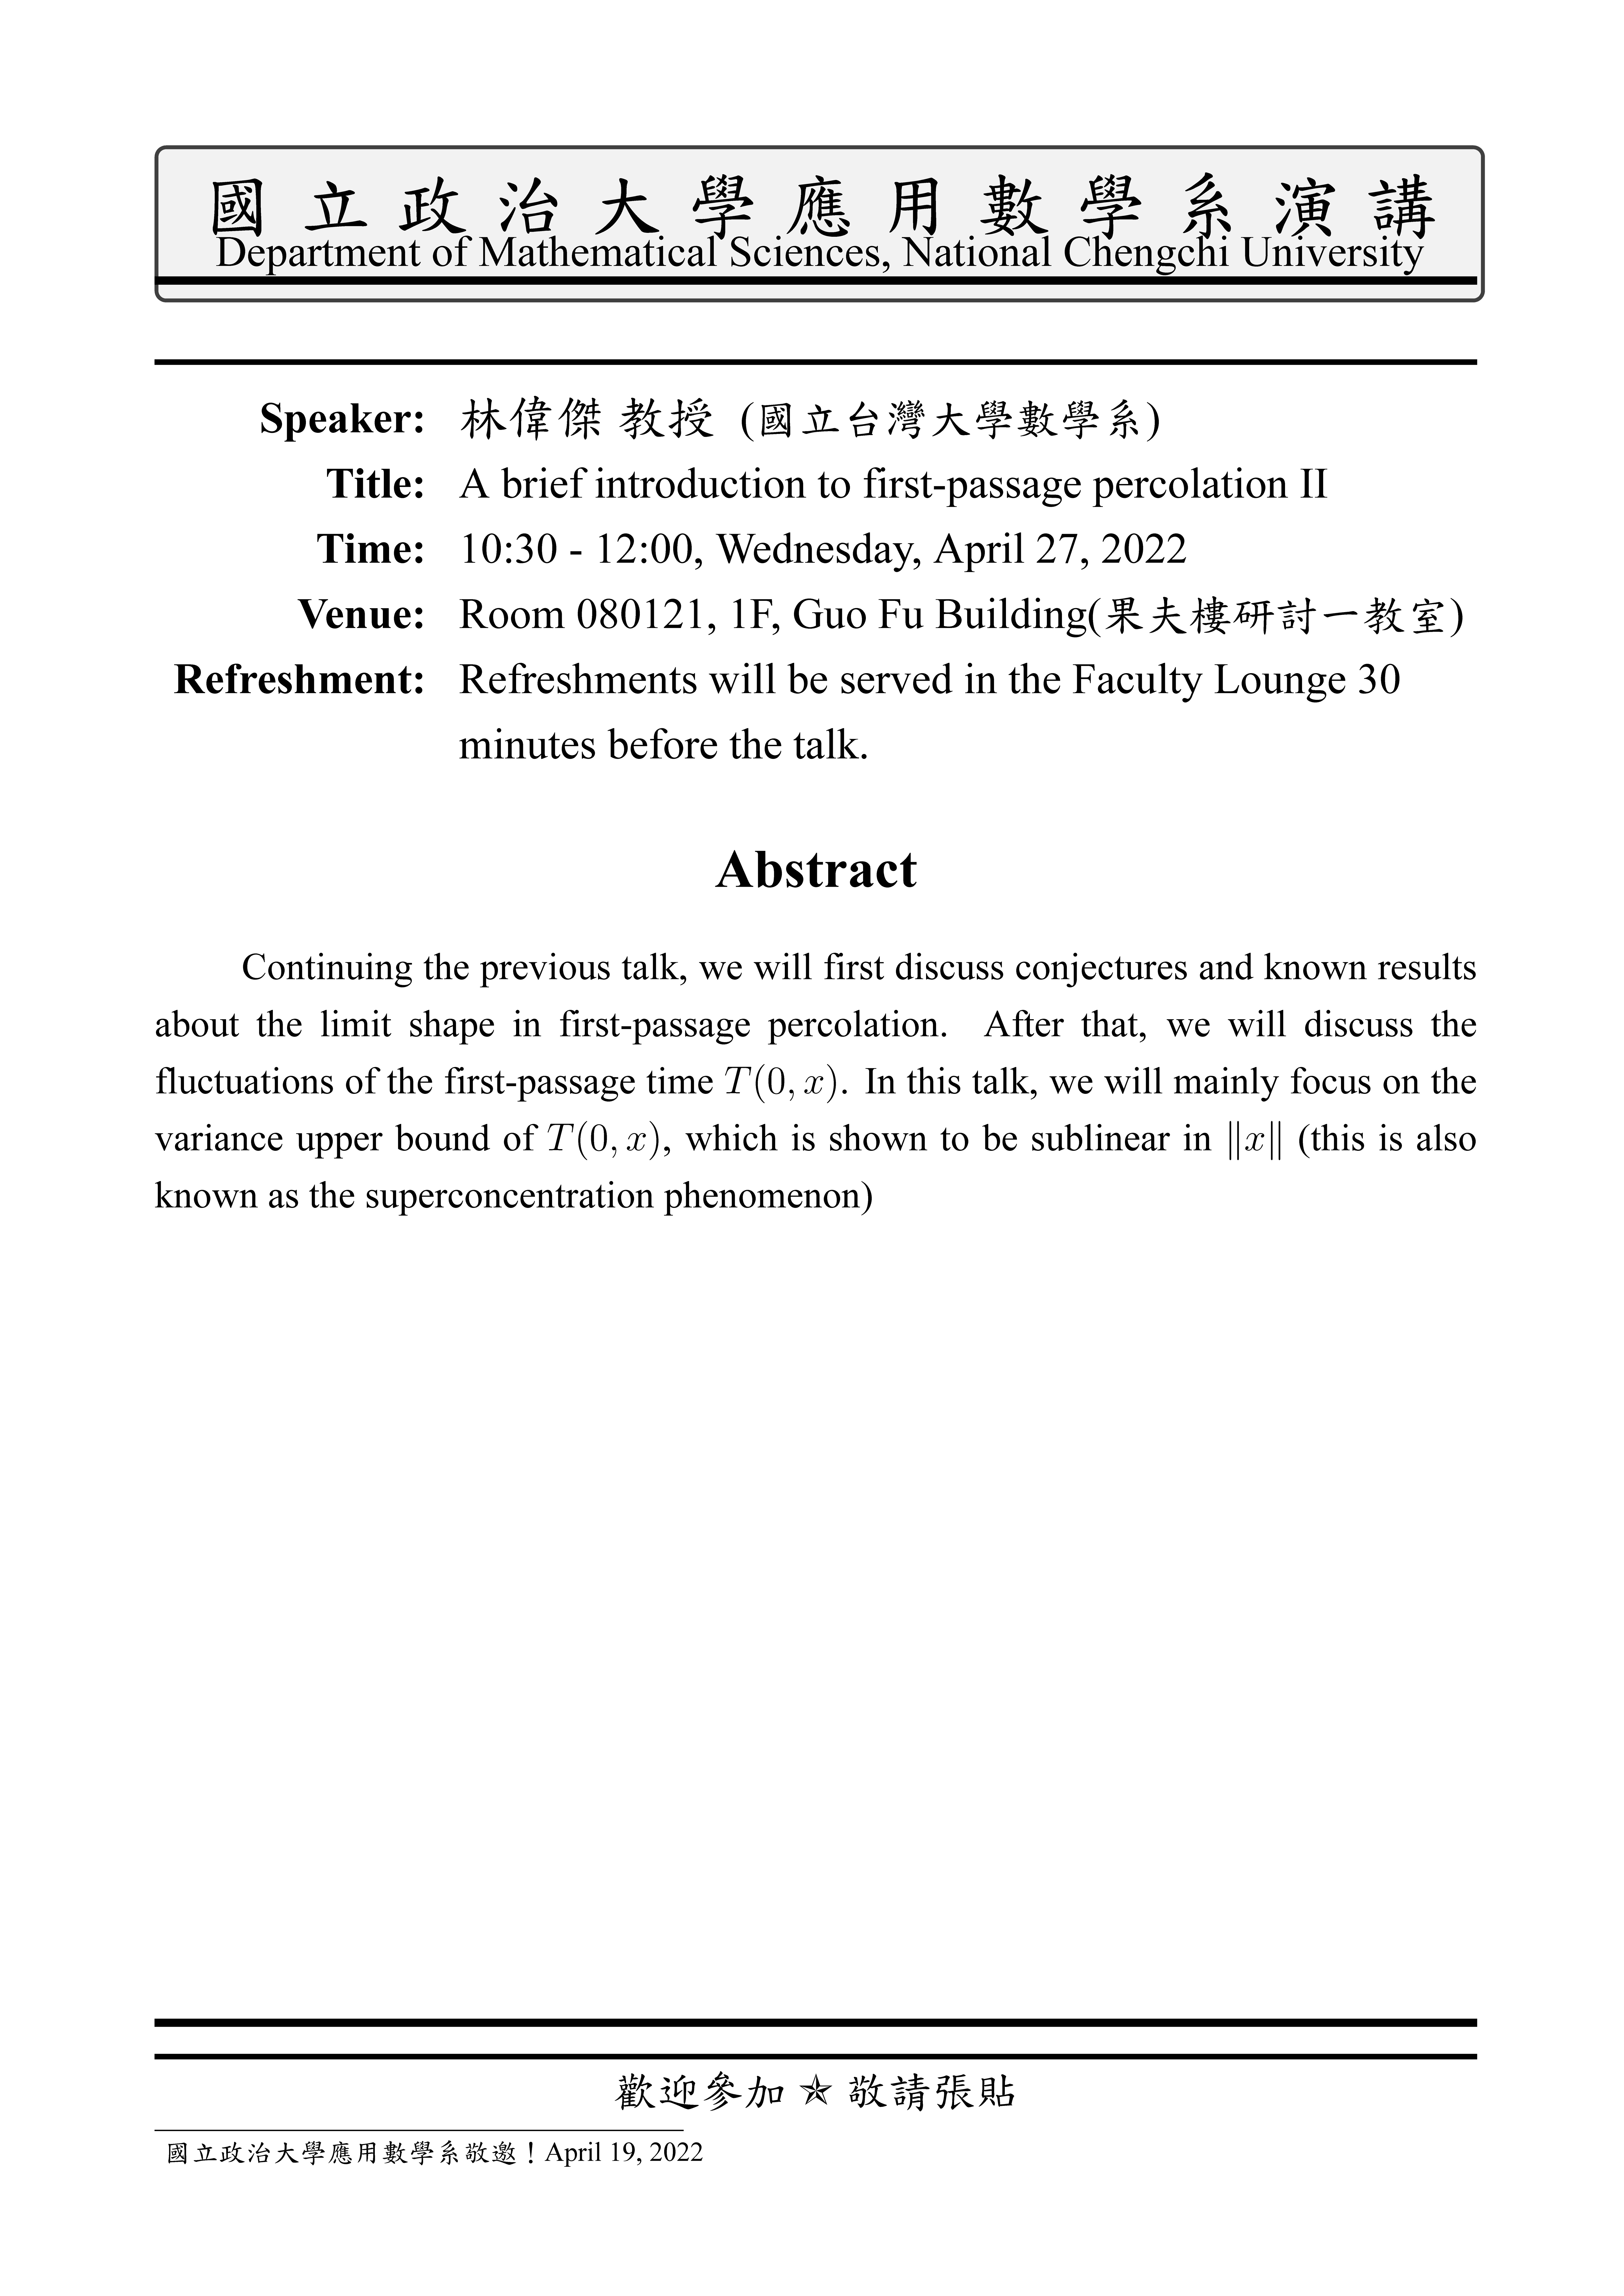 [NCTS Probability Seminar, April 27, 2022]林偉傑教授(國立台灣大學數學系)A brief introduction to first-passage percolation II